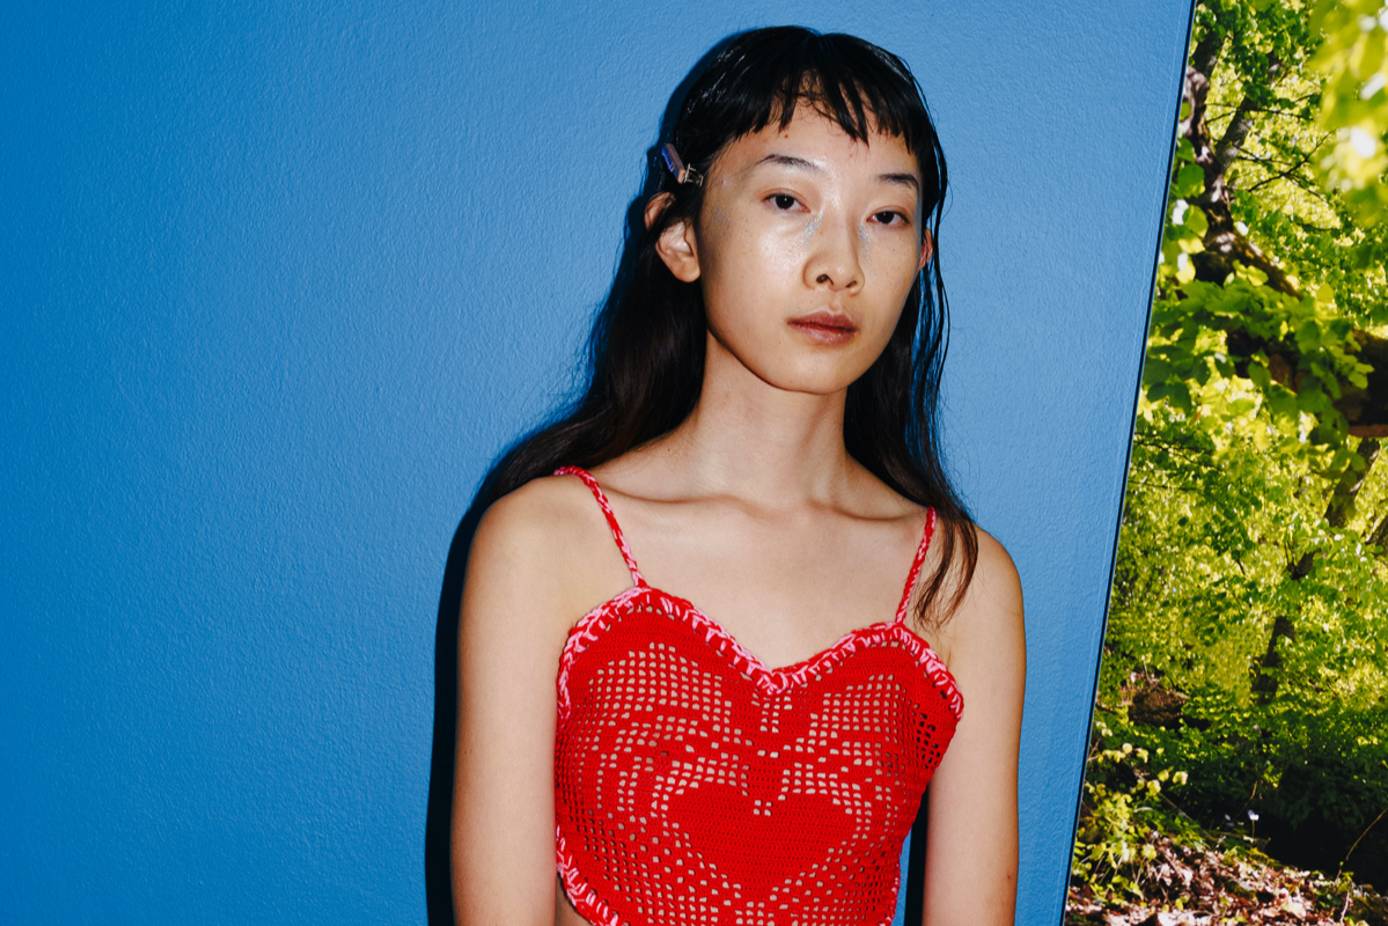 BTS wears dresses and skirts in new gender-bending photoshoot